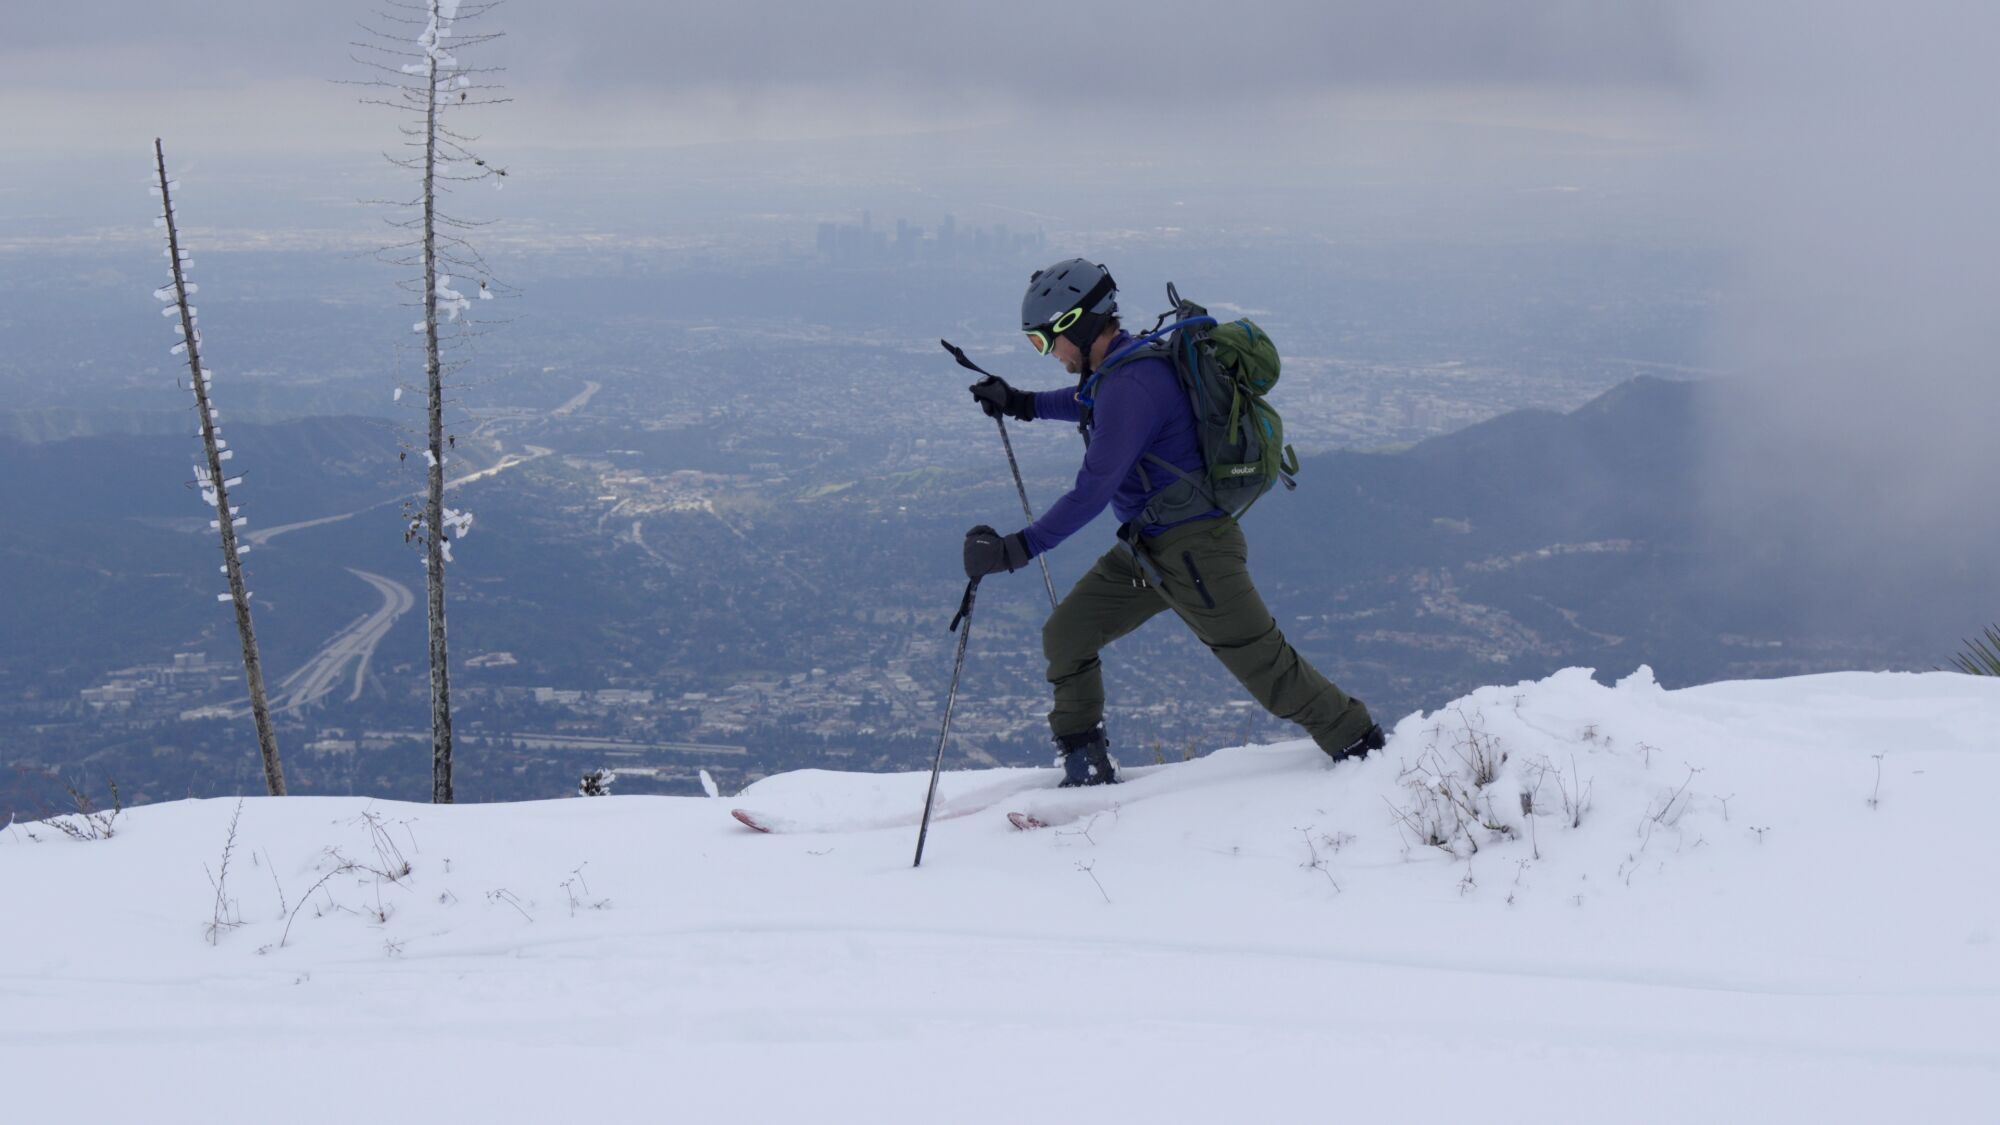 Matt Dixon skis on the summit of Mt. Lukens with the downtown Los Angeles skyline in the distance.